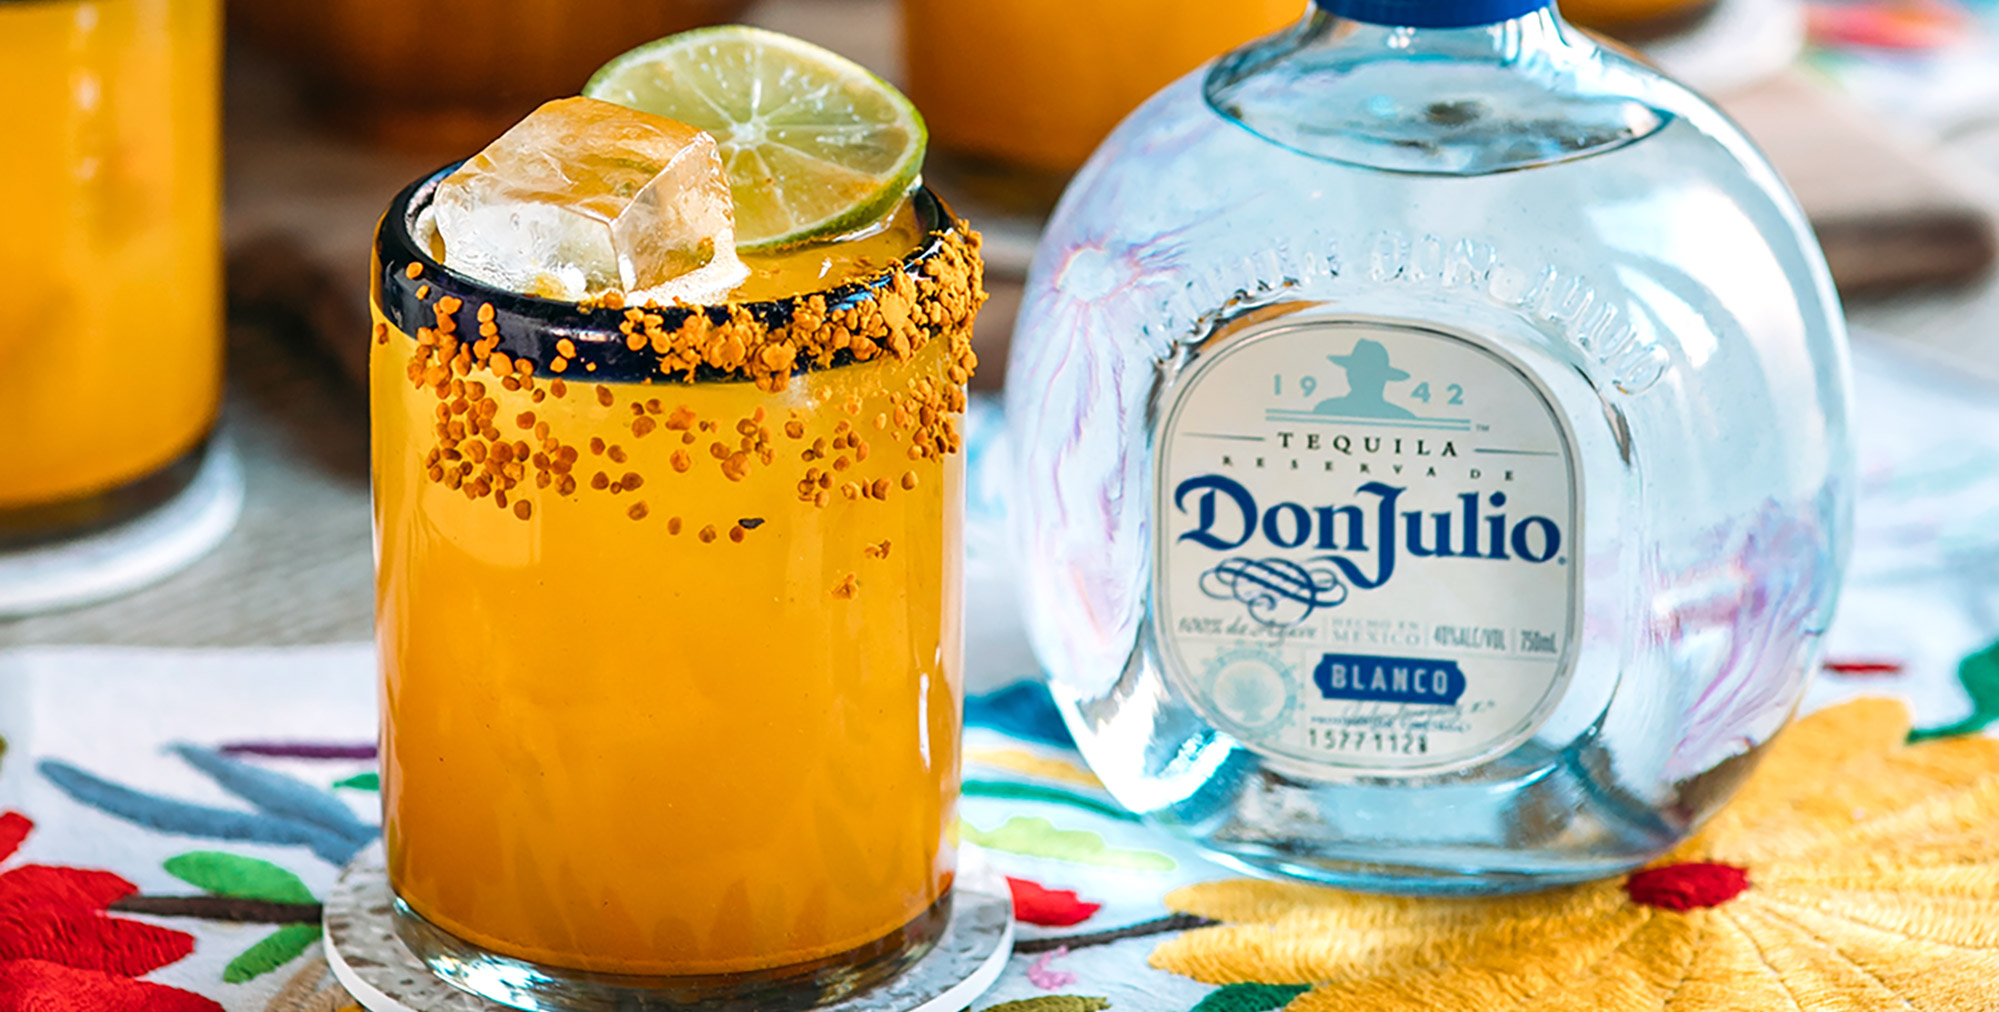 Turmerican Cocktail made with Don Julio Blanco Tequila